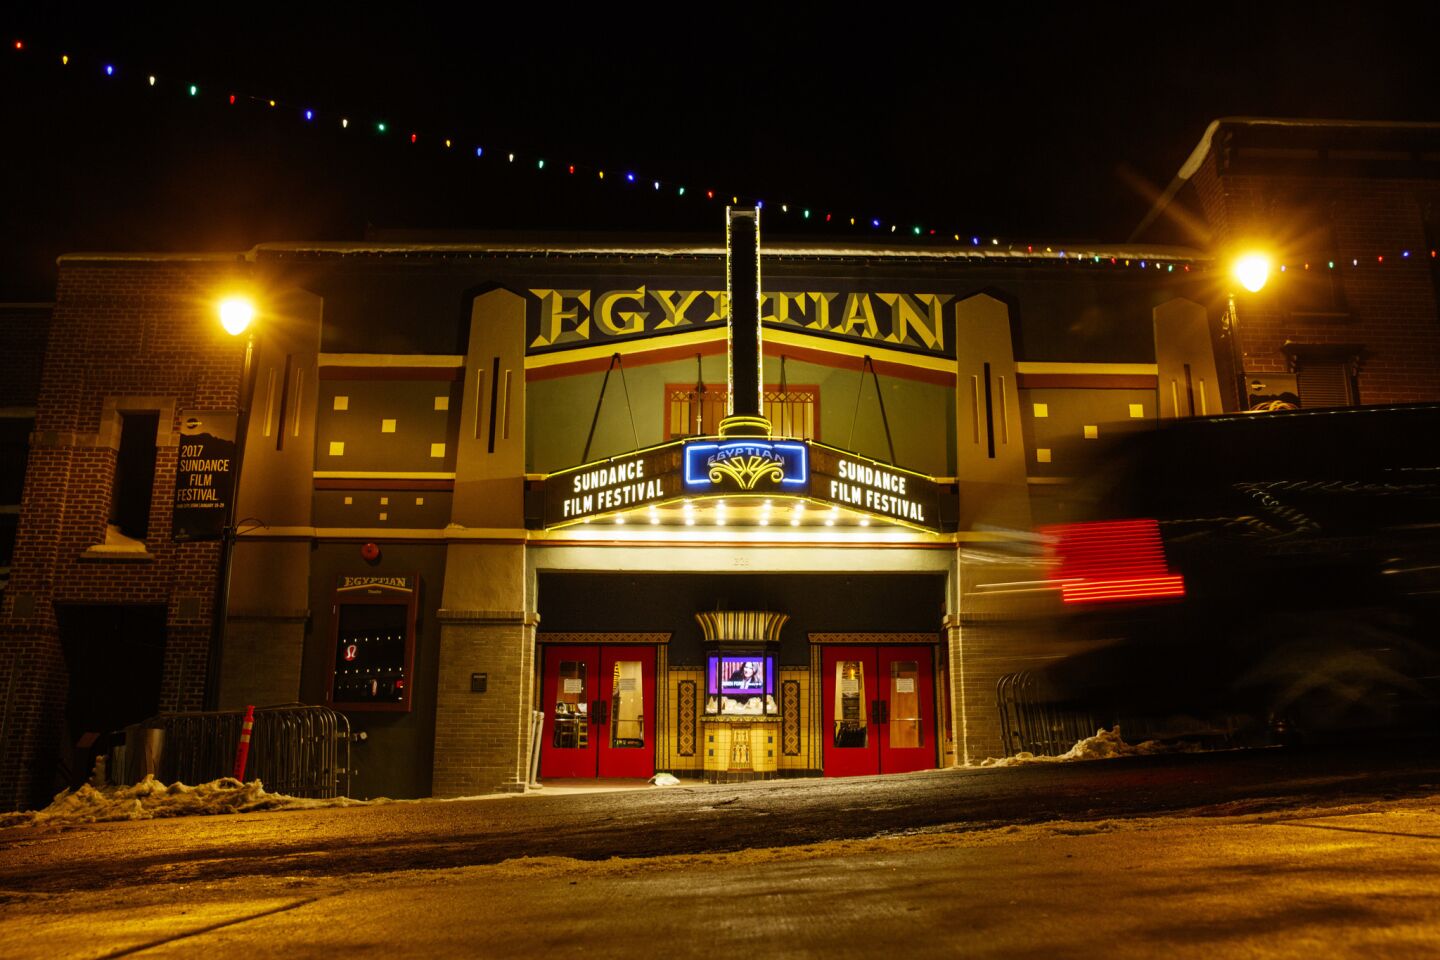 The Egyptian Theatre on Main Street, one of the major venues for the Sundance Film Festival, is lit up a few nights before the festival's opening in Park City, Utah.